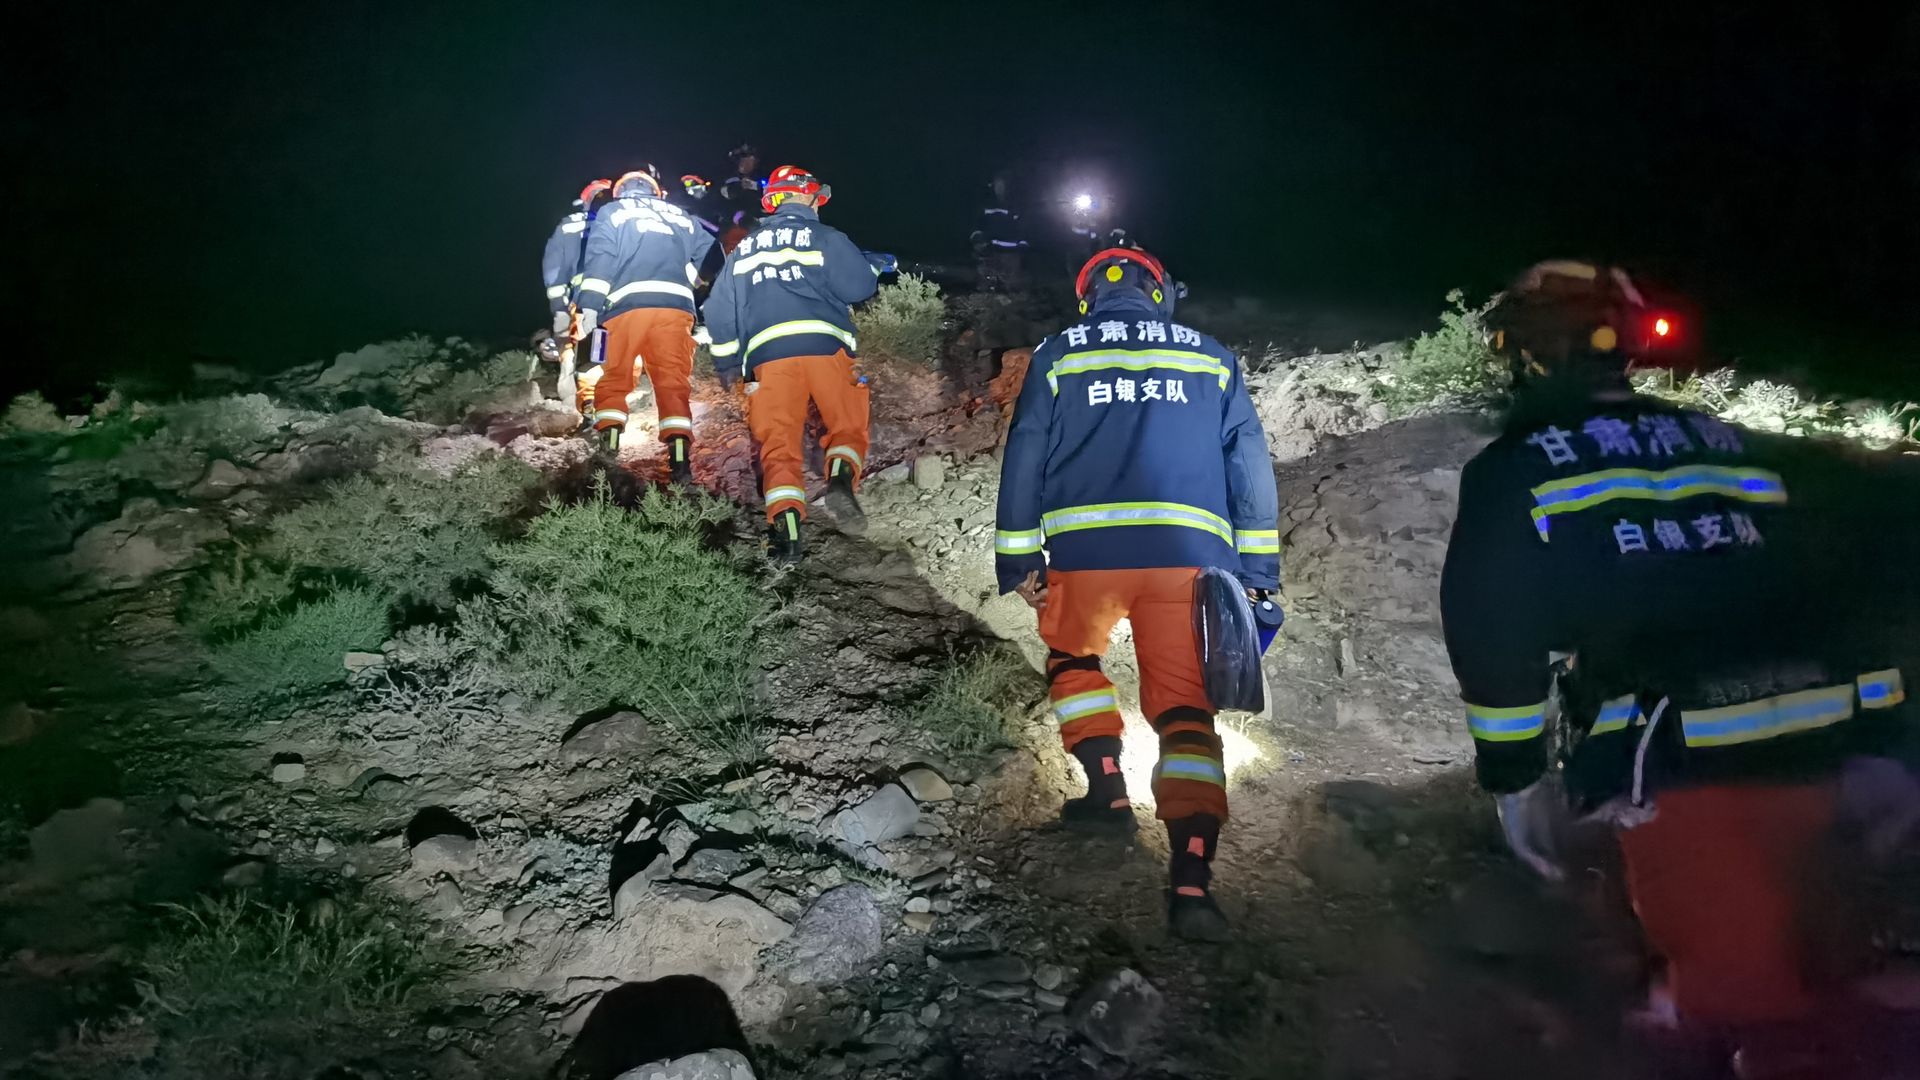 A line of emergency responders walk up a hiking trail at night